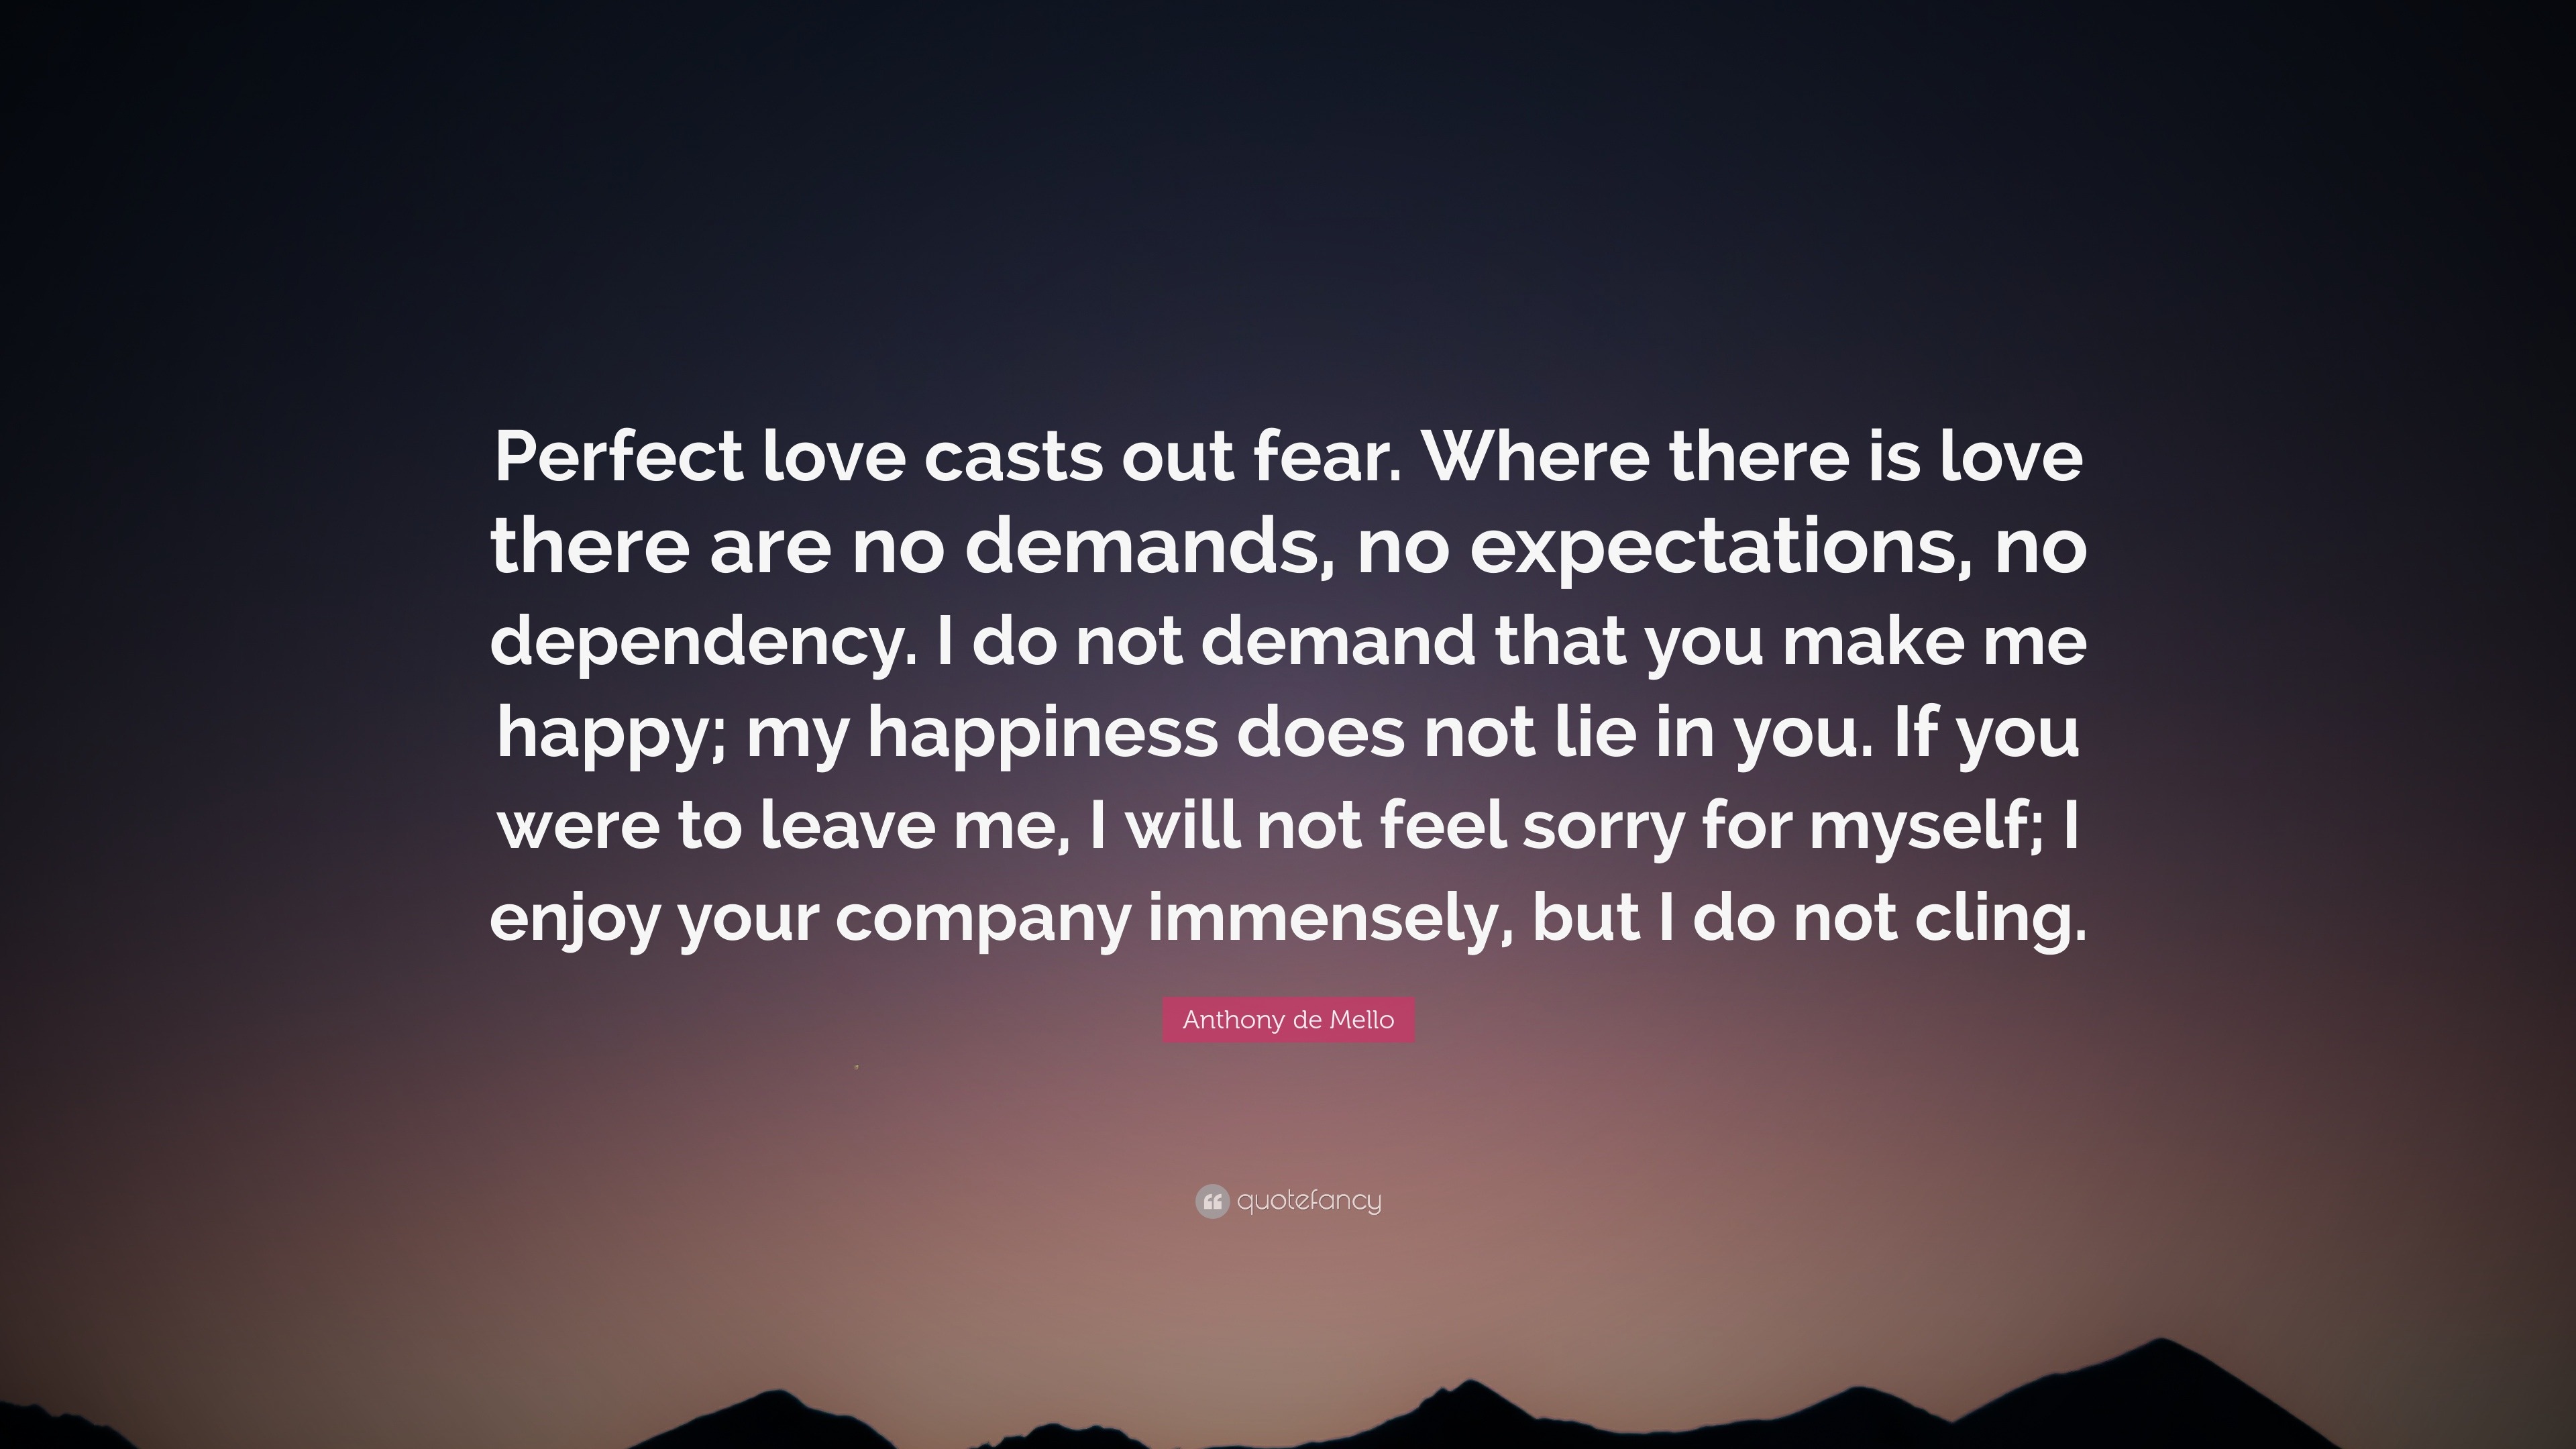 Anthony de Mello Quote “Perfect love casts out fear Where there is love